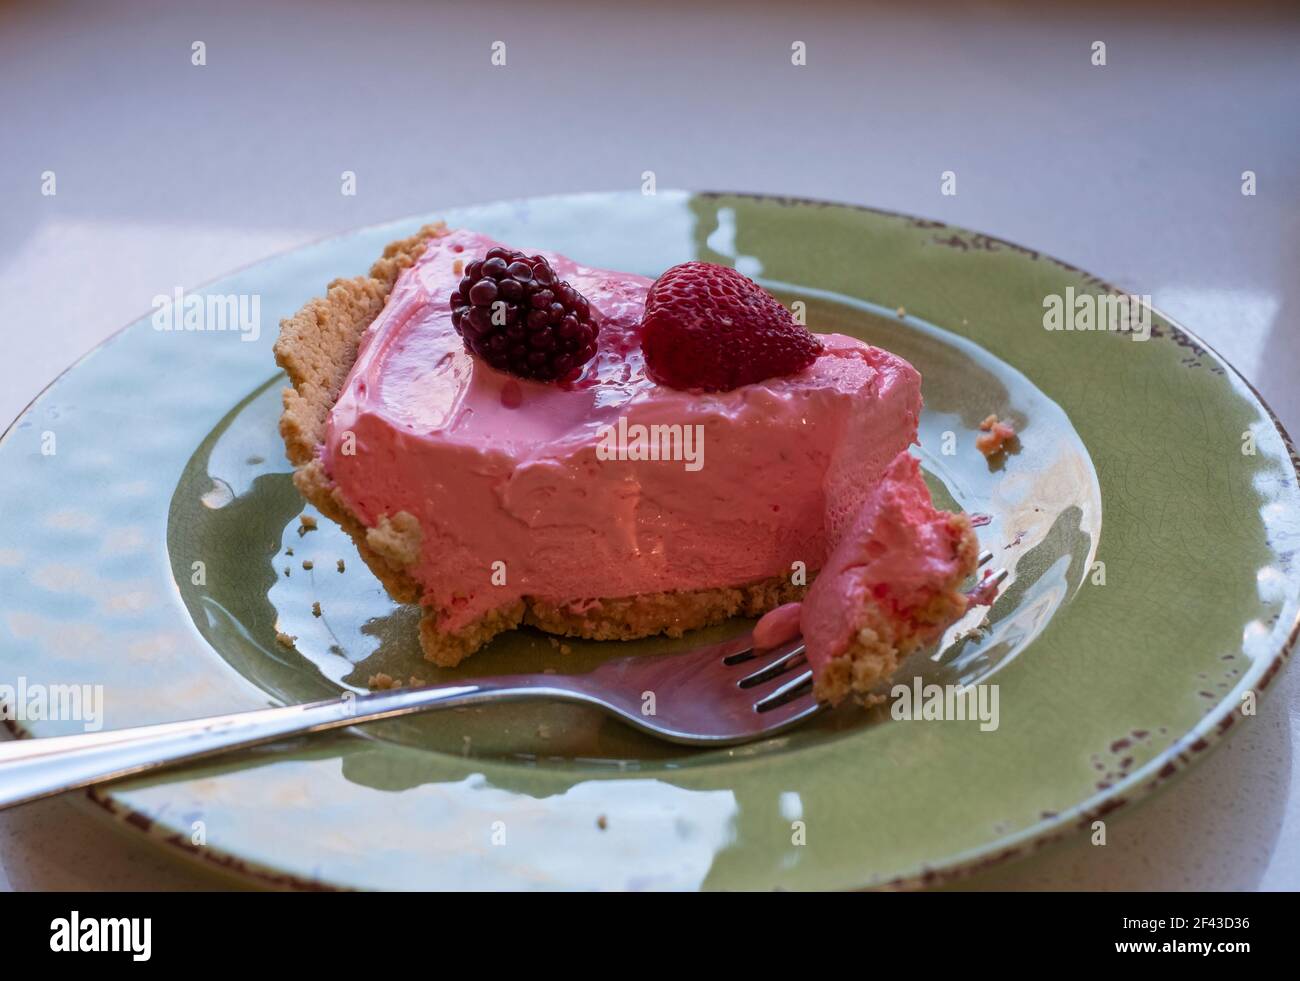 Slice of strawberry chiffon pie with fruit pieces on top. Graham cracker crust. Made with strawberry koolade flavoring. Stock Photo